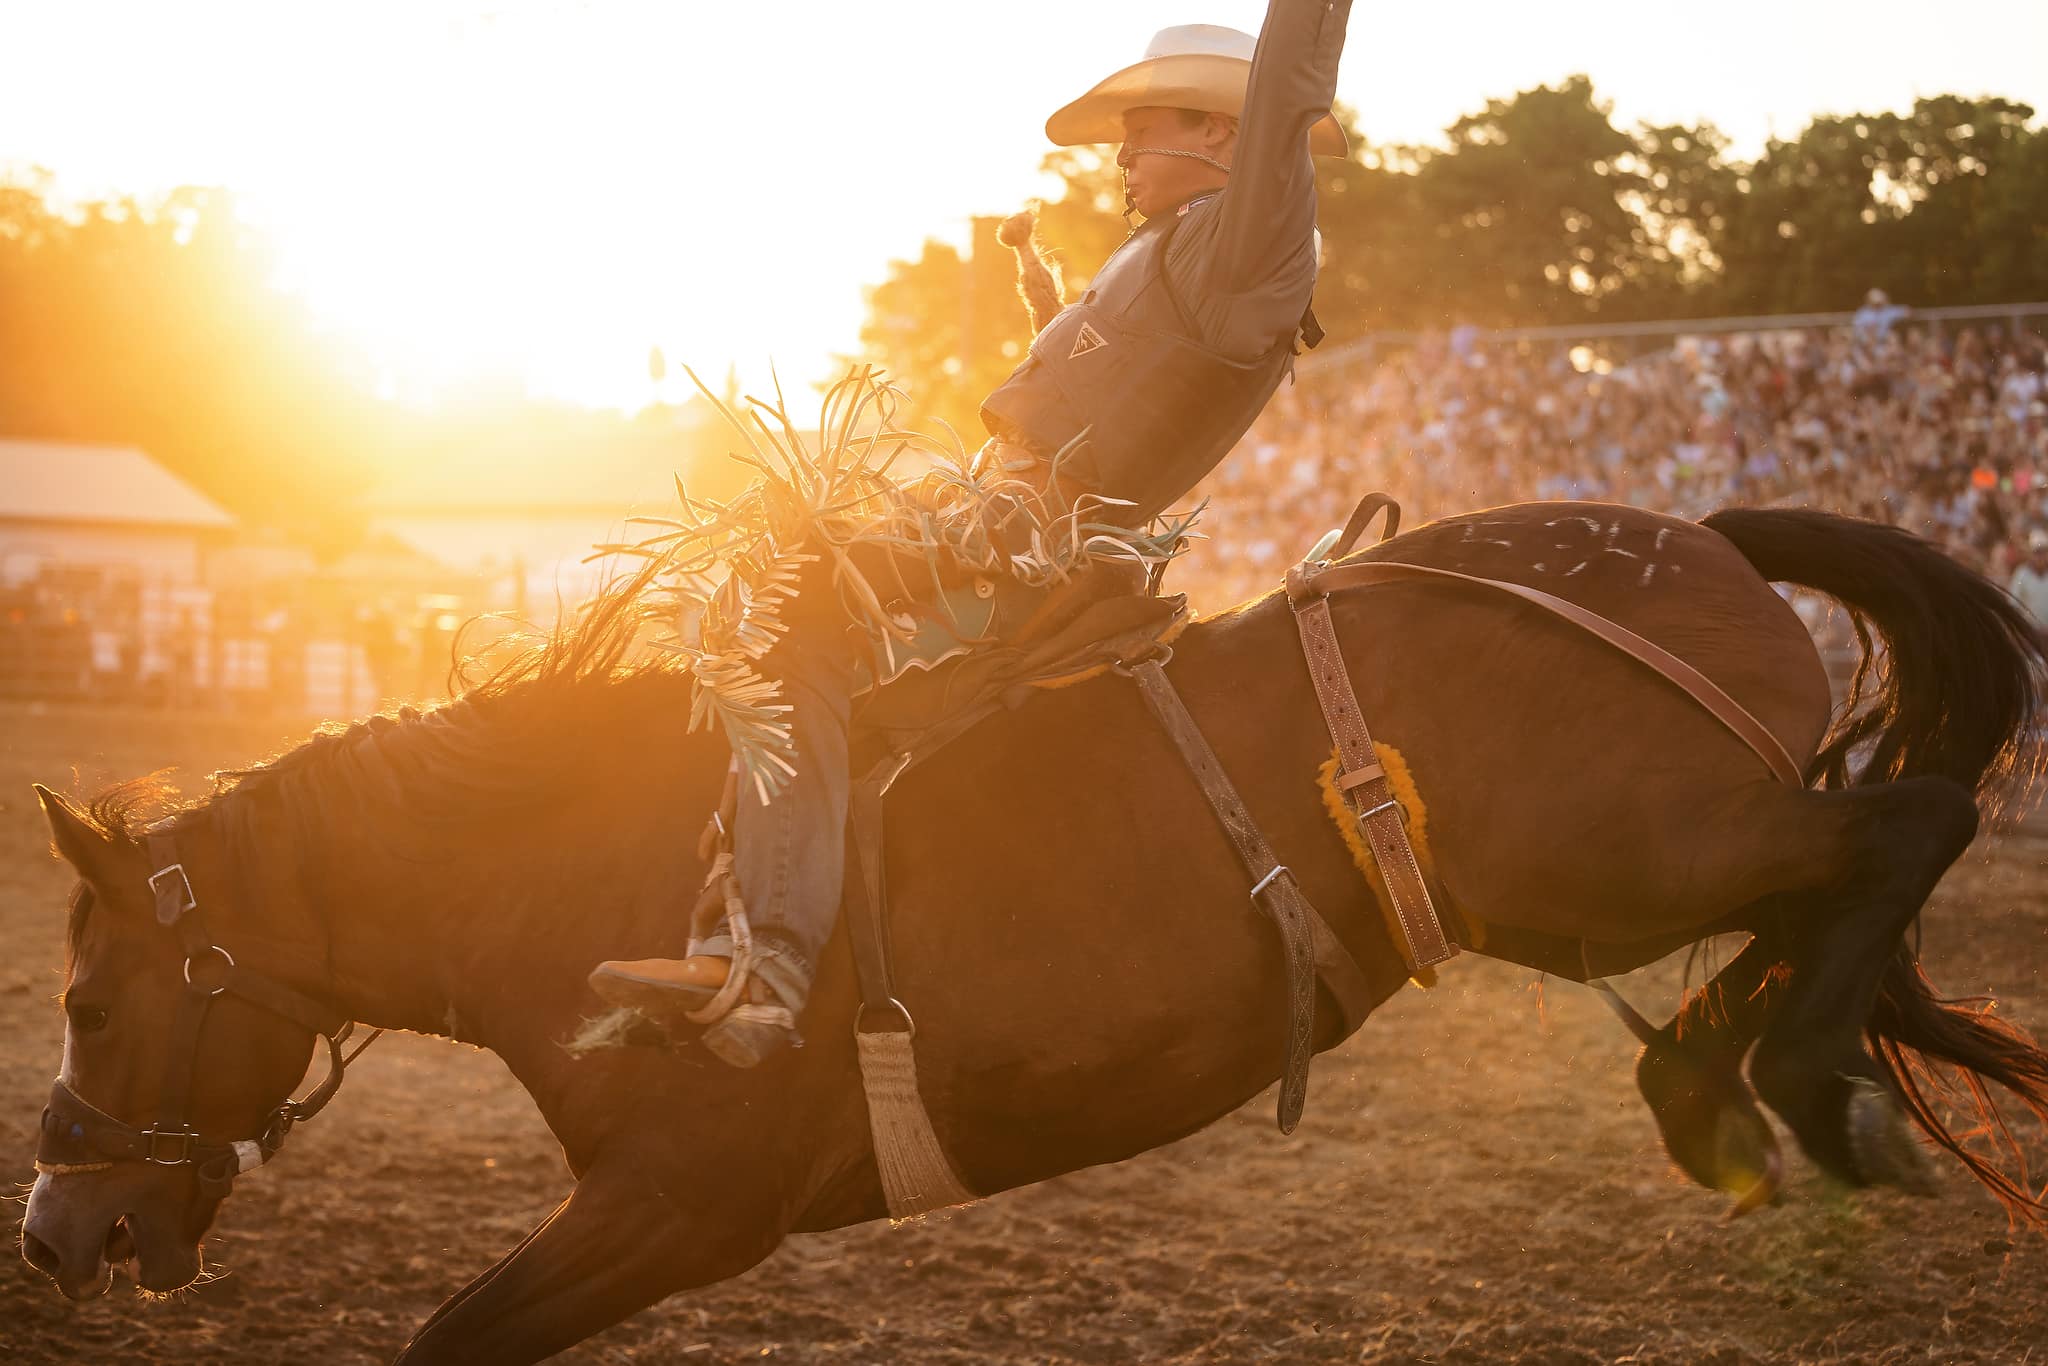 Rodeo in a Small Town – Photographs from the Waconia Rodeo